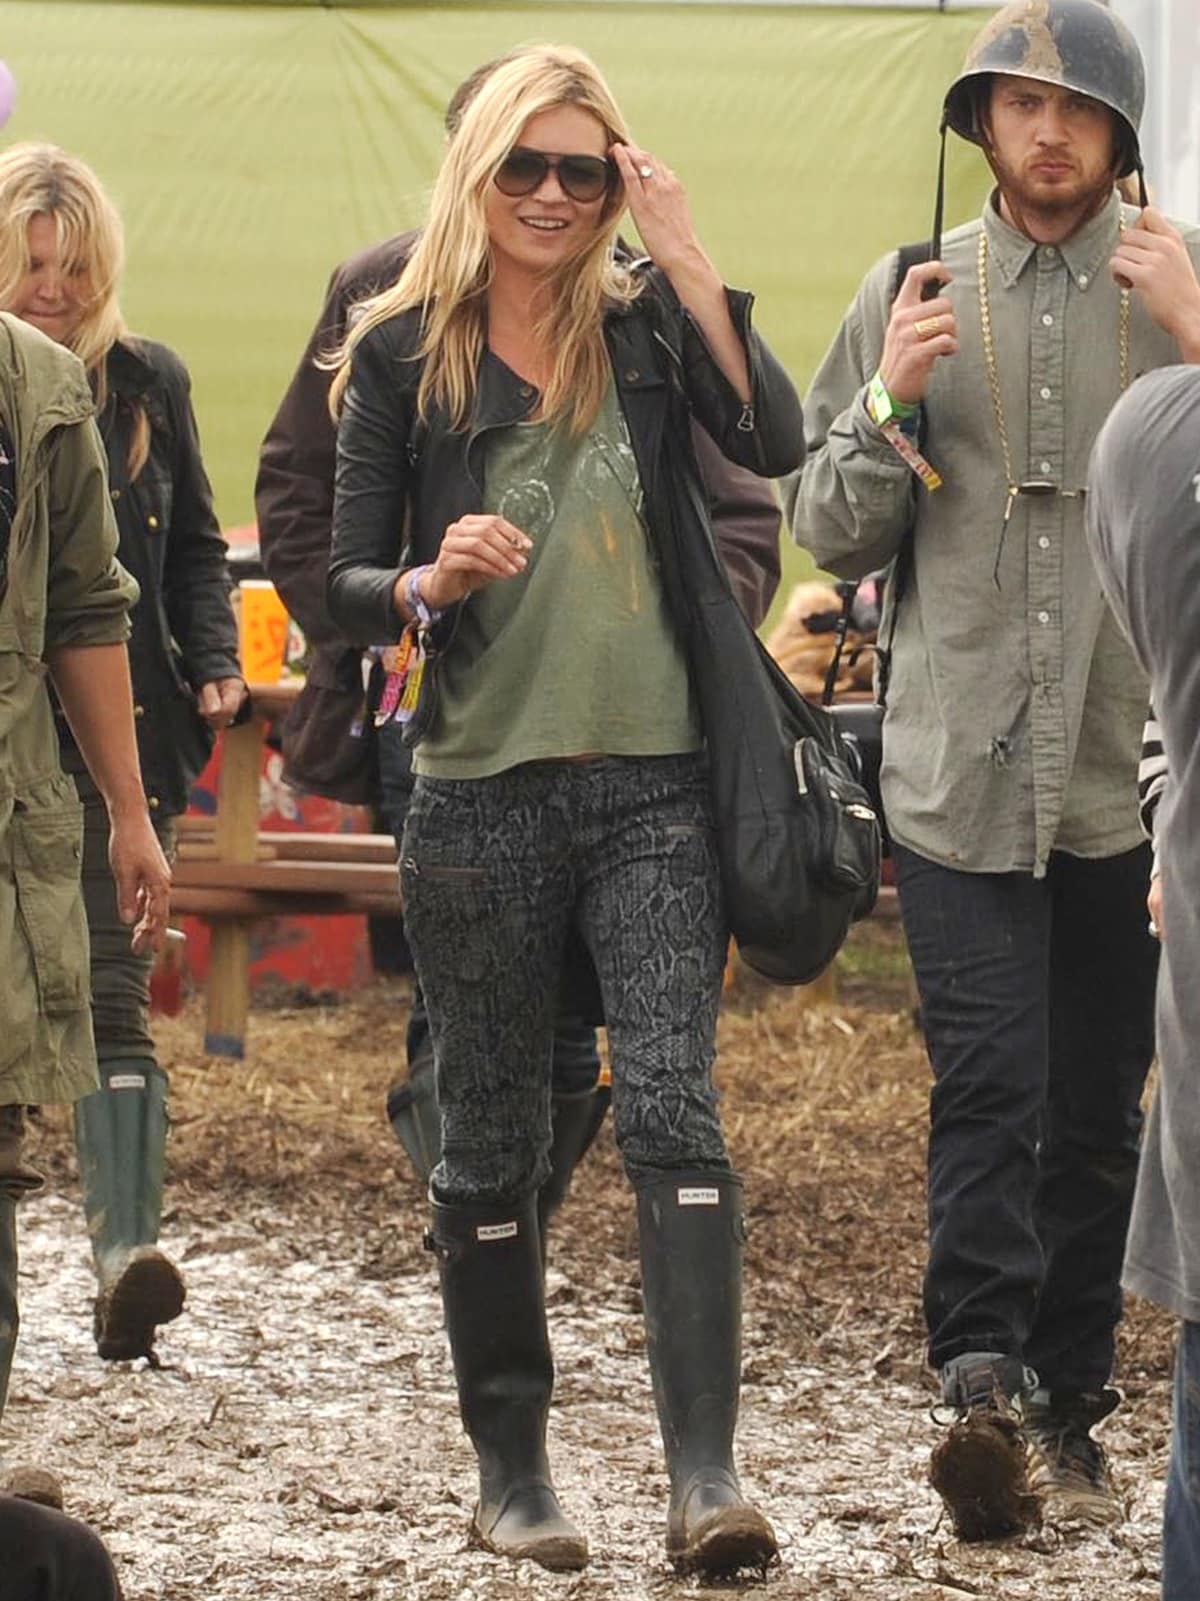 Kate Moss exuded rock chick vibes at the Glastonbury Festival in 2011, donning a pair of blue snakeskin-print skinny trousers, a green T-shirt, a sleek black leather jacket, and completing the look with Hunter Wellington boots